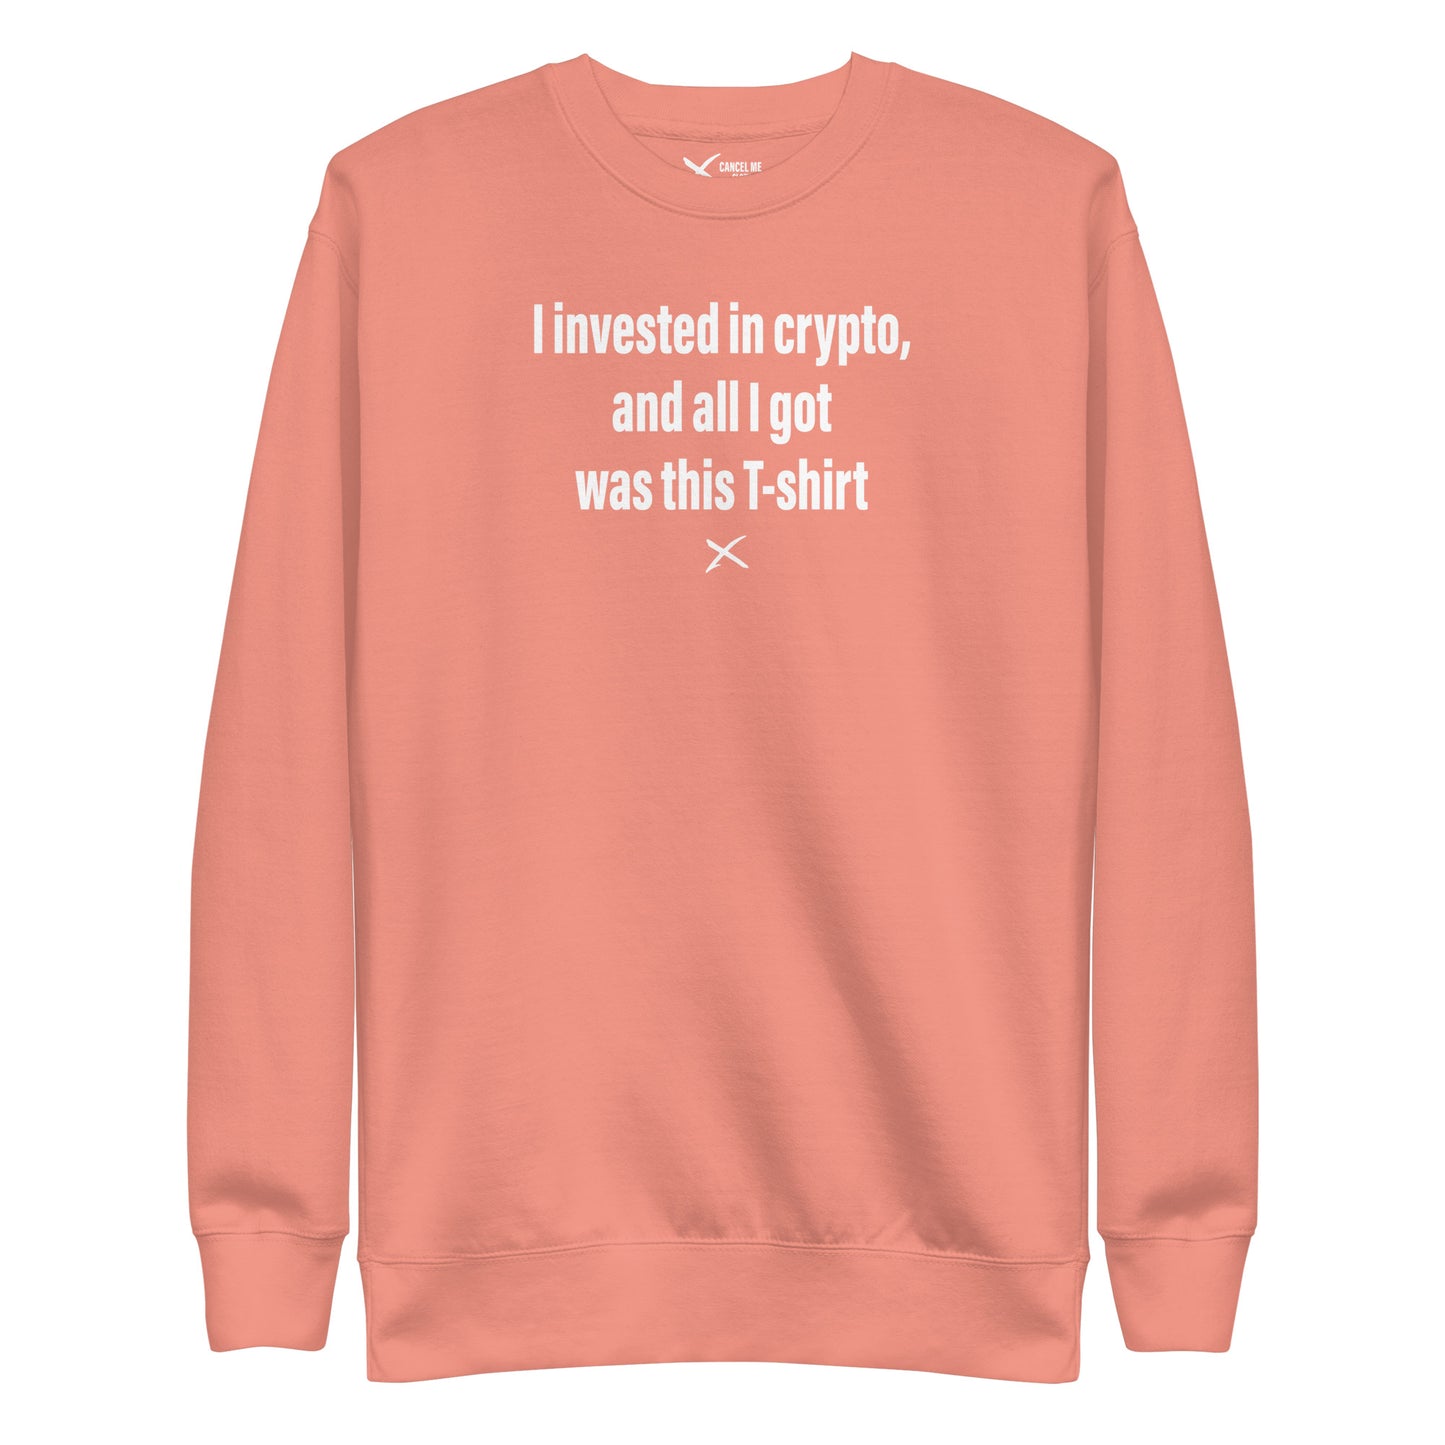 I invested in crypto, and all I got was this T-shirt - Sweatshirt